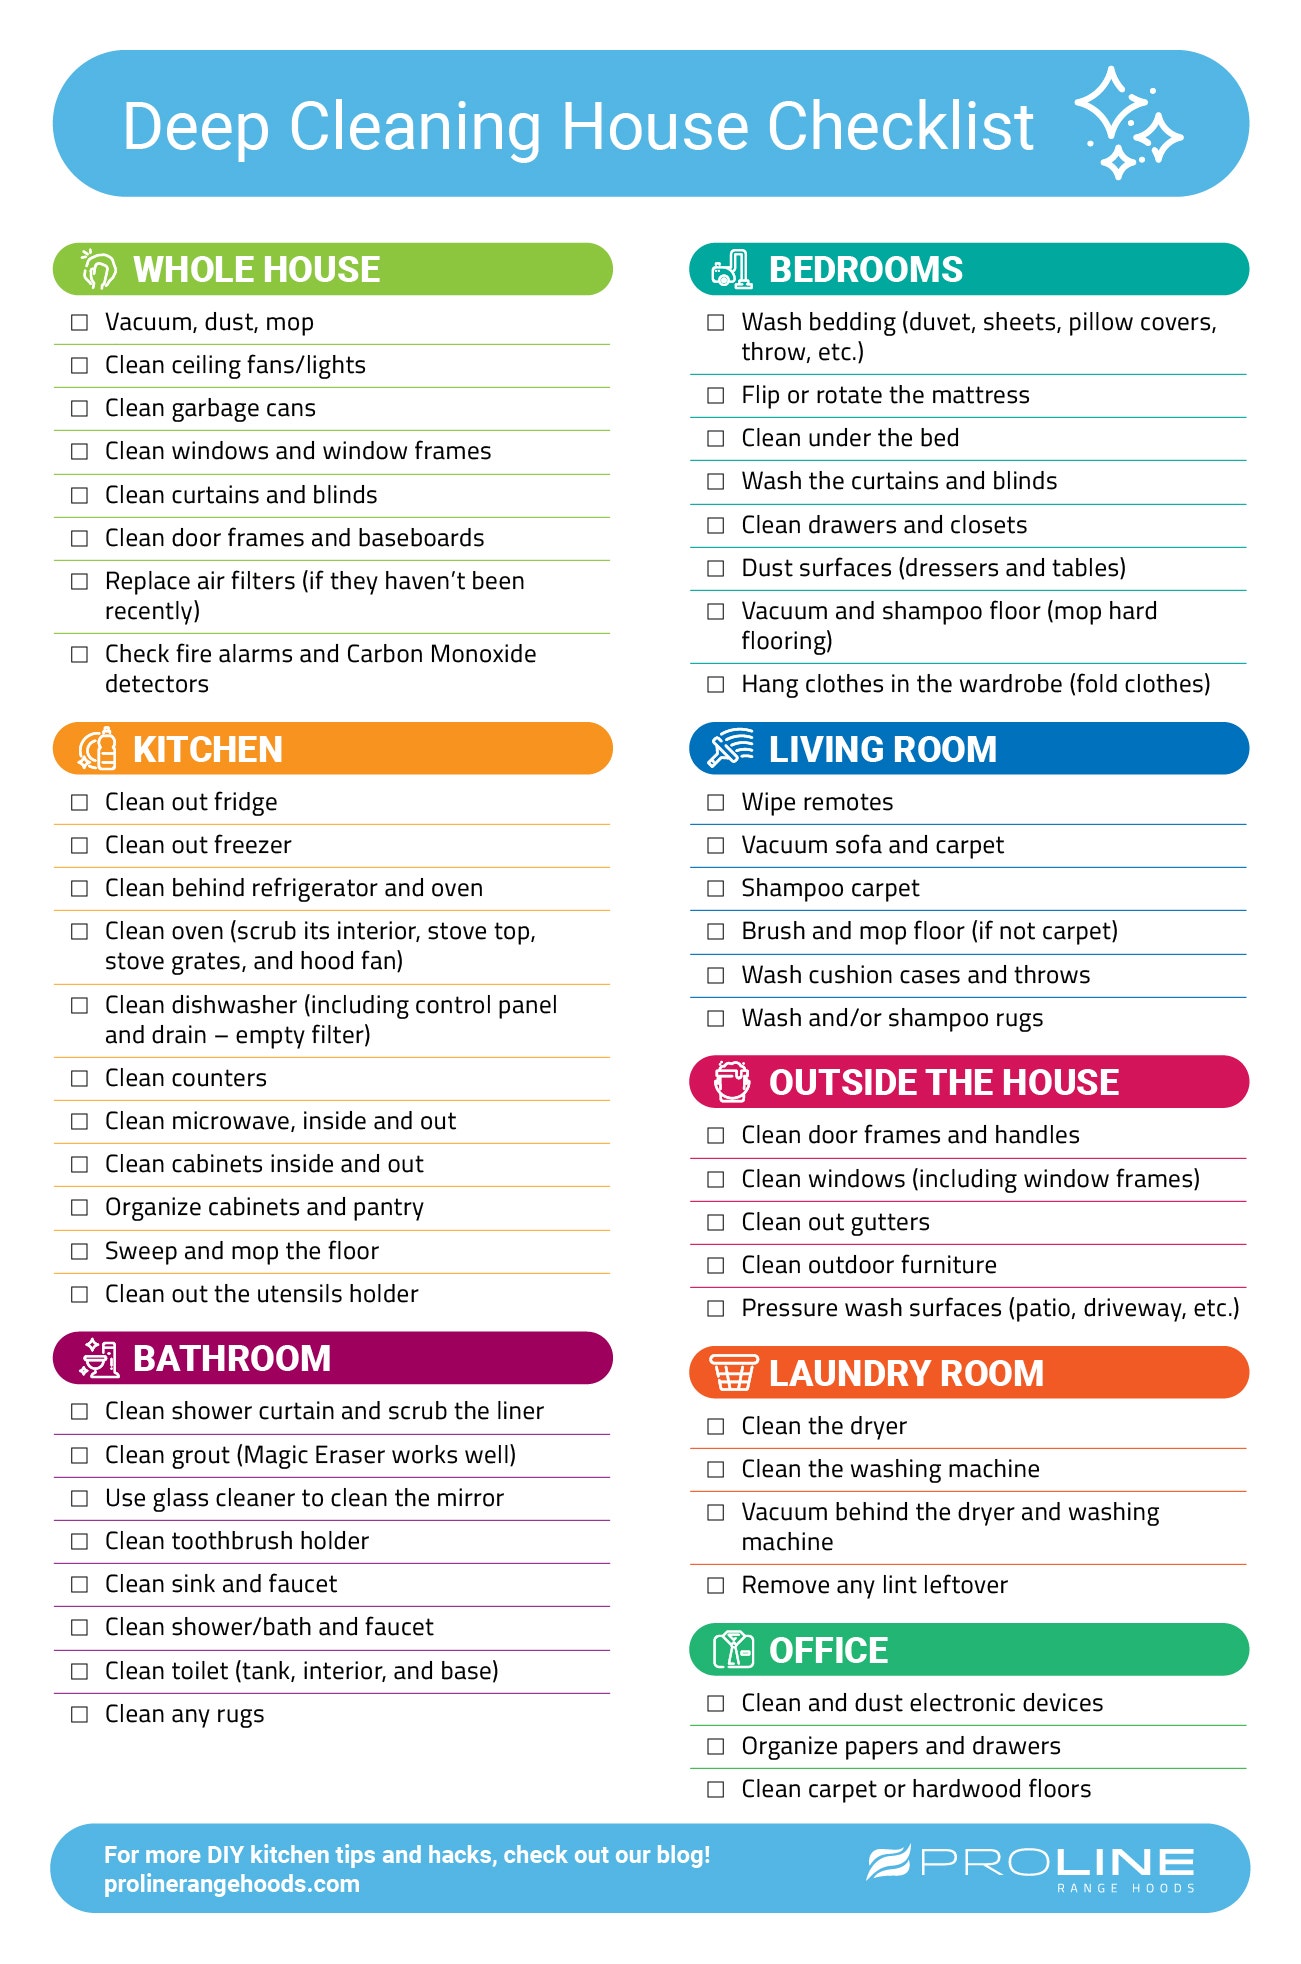 Spring Cleaning Tips for a Deep Clean Home (and a Free Checklist)!